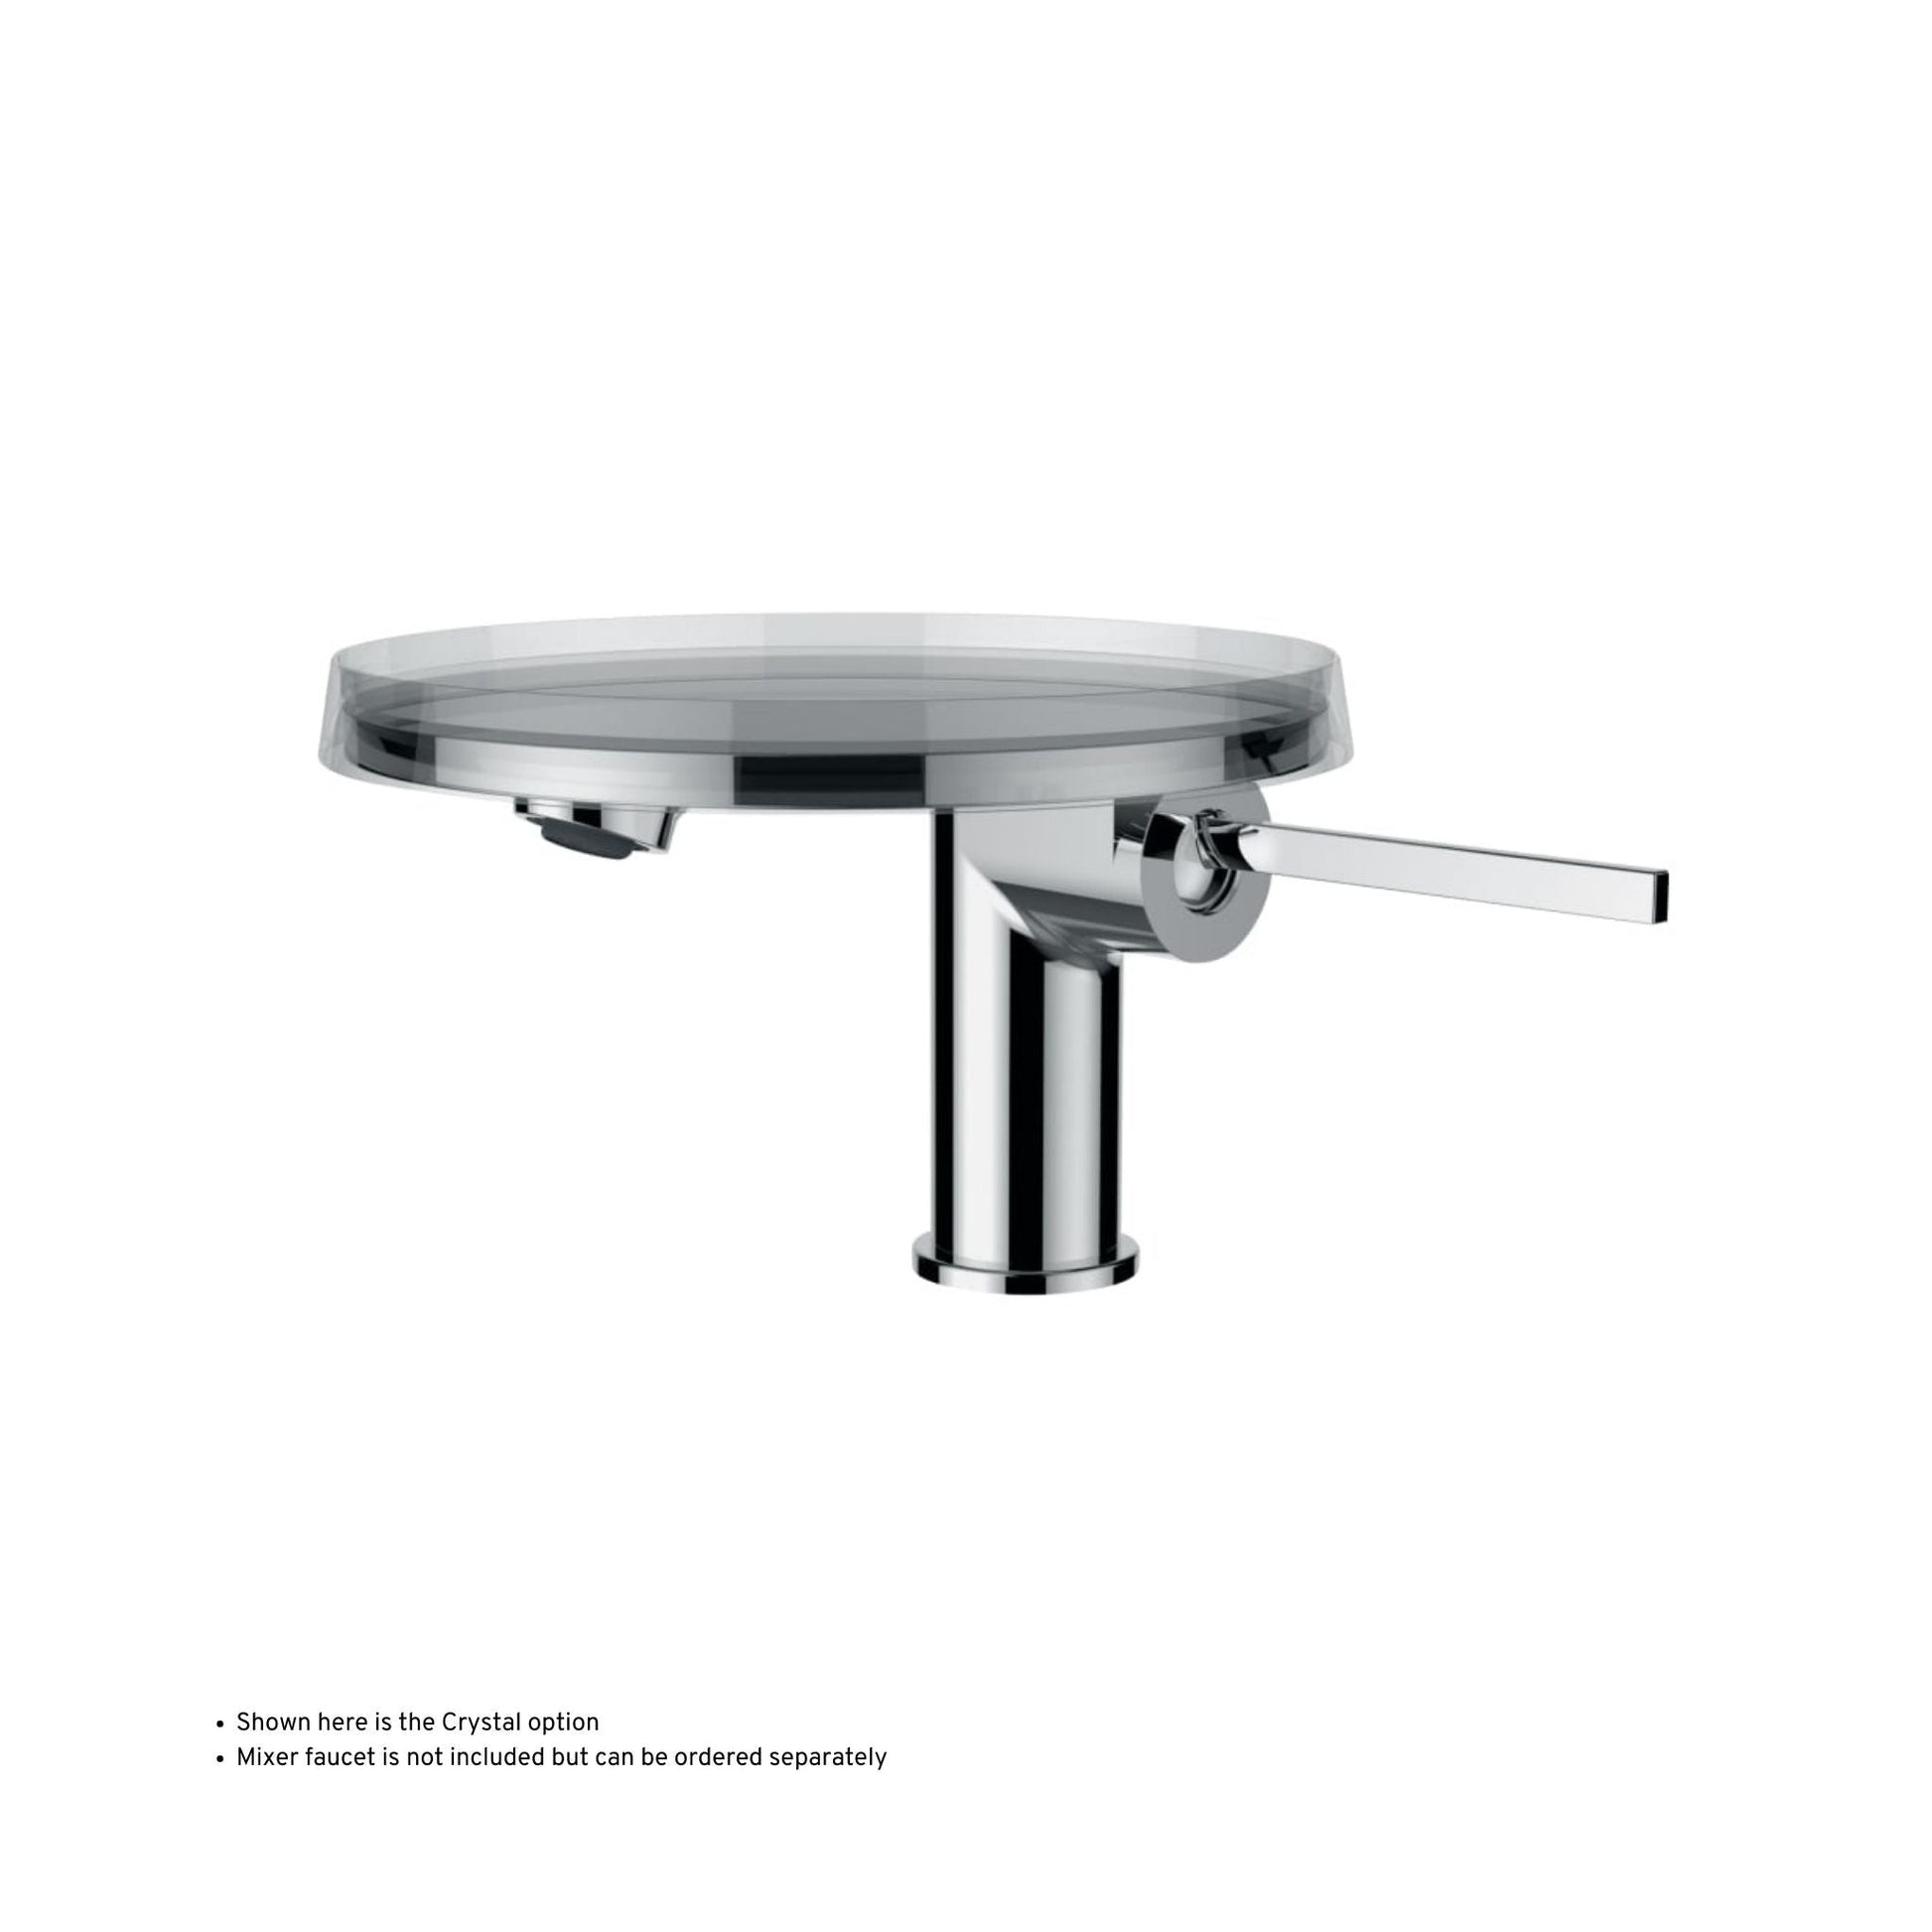 Laufen Kartell 7" Powder Pink Disc Tray for Toilet Paper Holders, Faucets, and Wall-Mounted Trays